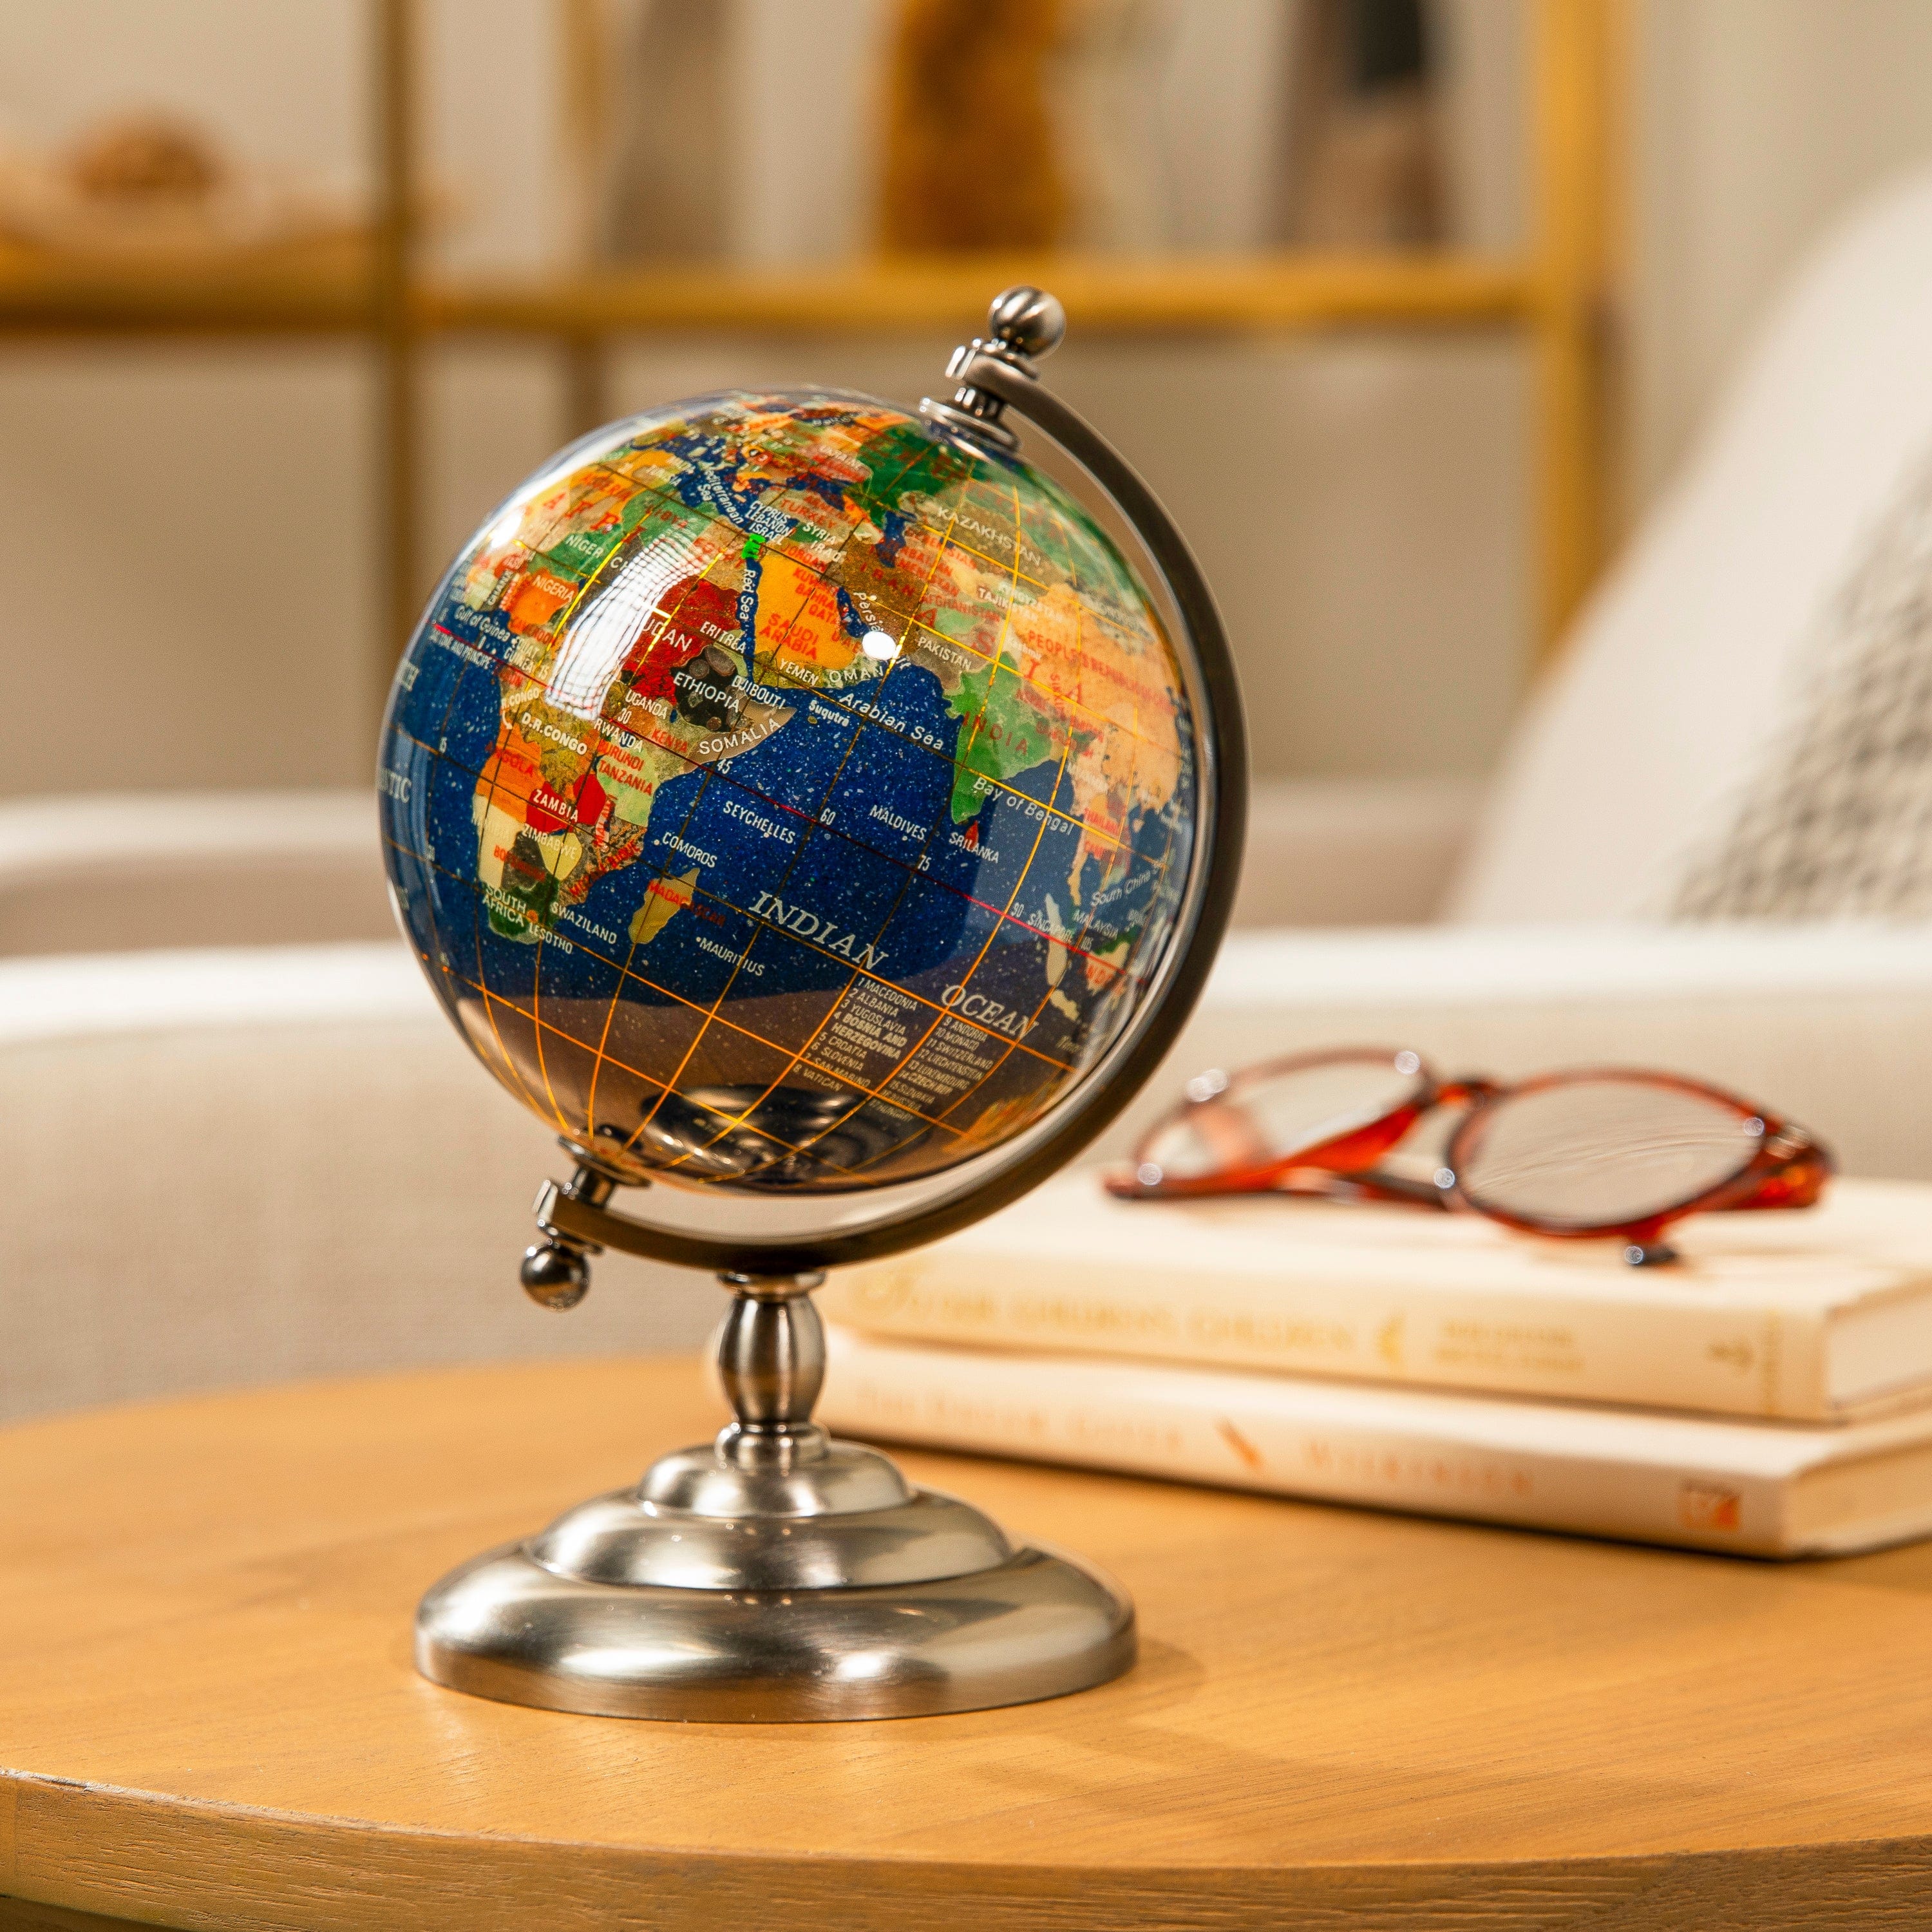 Kalifano Gemstone Globes Gemstone Globe with Lapis Ocean on Antique Silver Stand - 7.25" GL110-AS